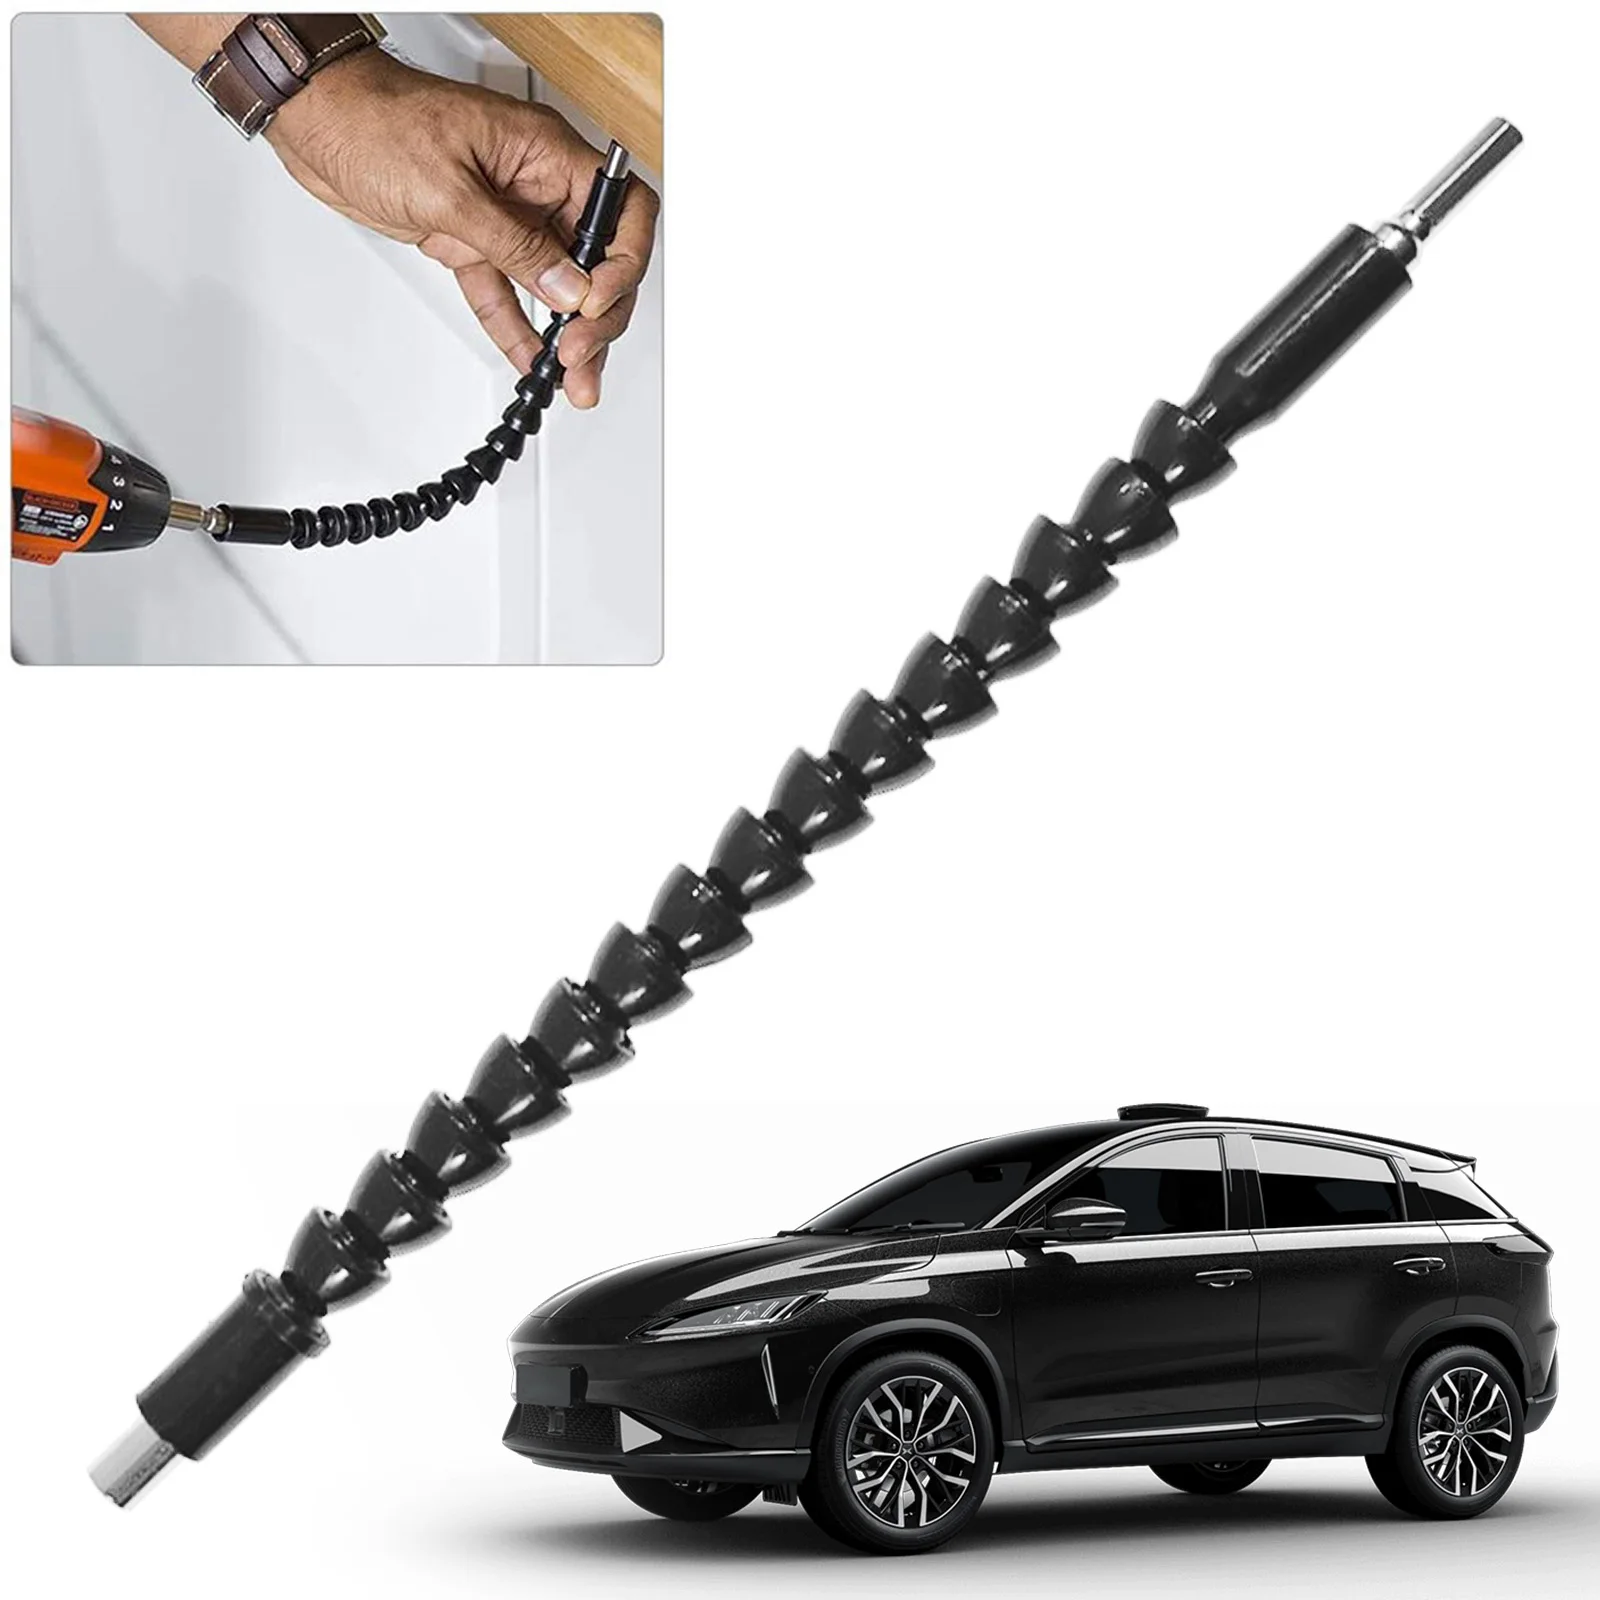 

295MM Flexible Hex Shaft Drill Bits Extension Bit Holder with Magnetic Connect Drive Shaft Electric Drill Power Tool Accessory